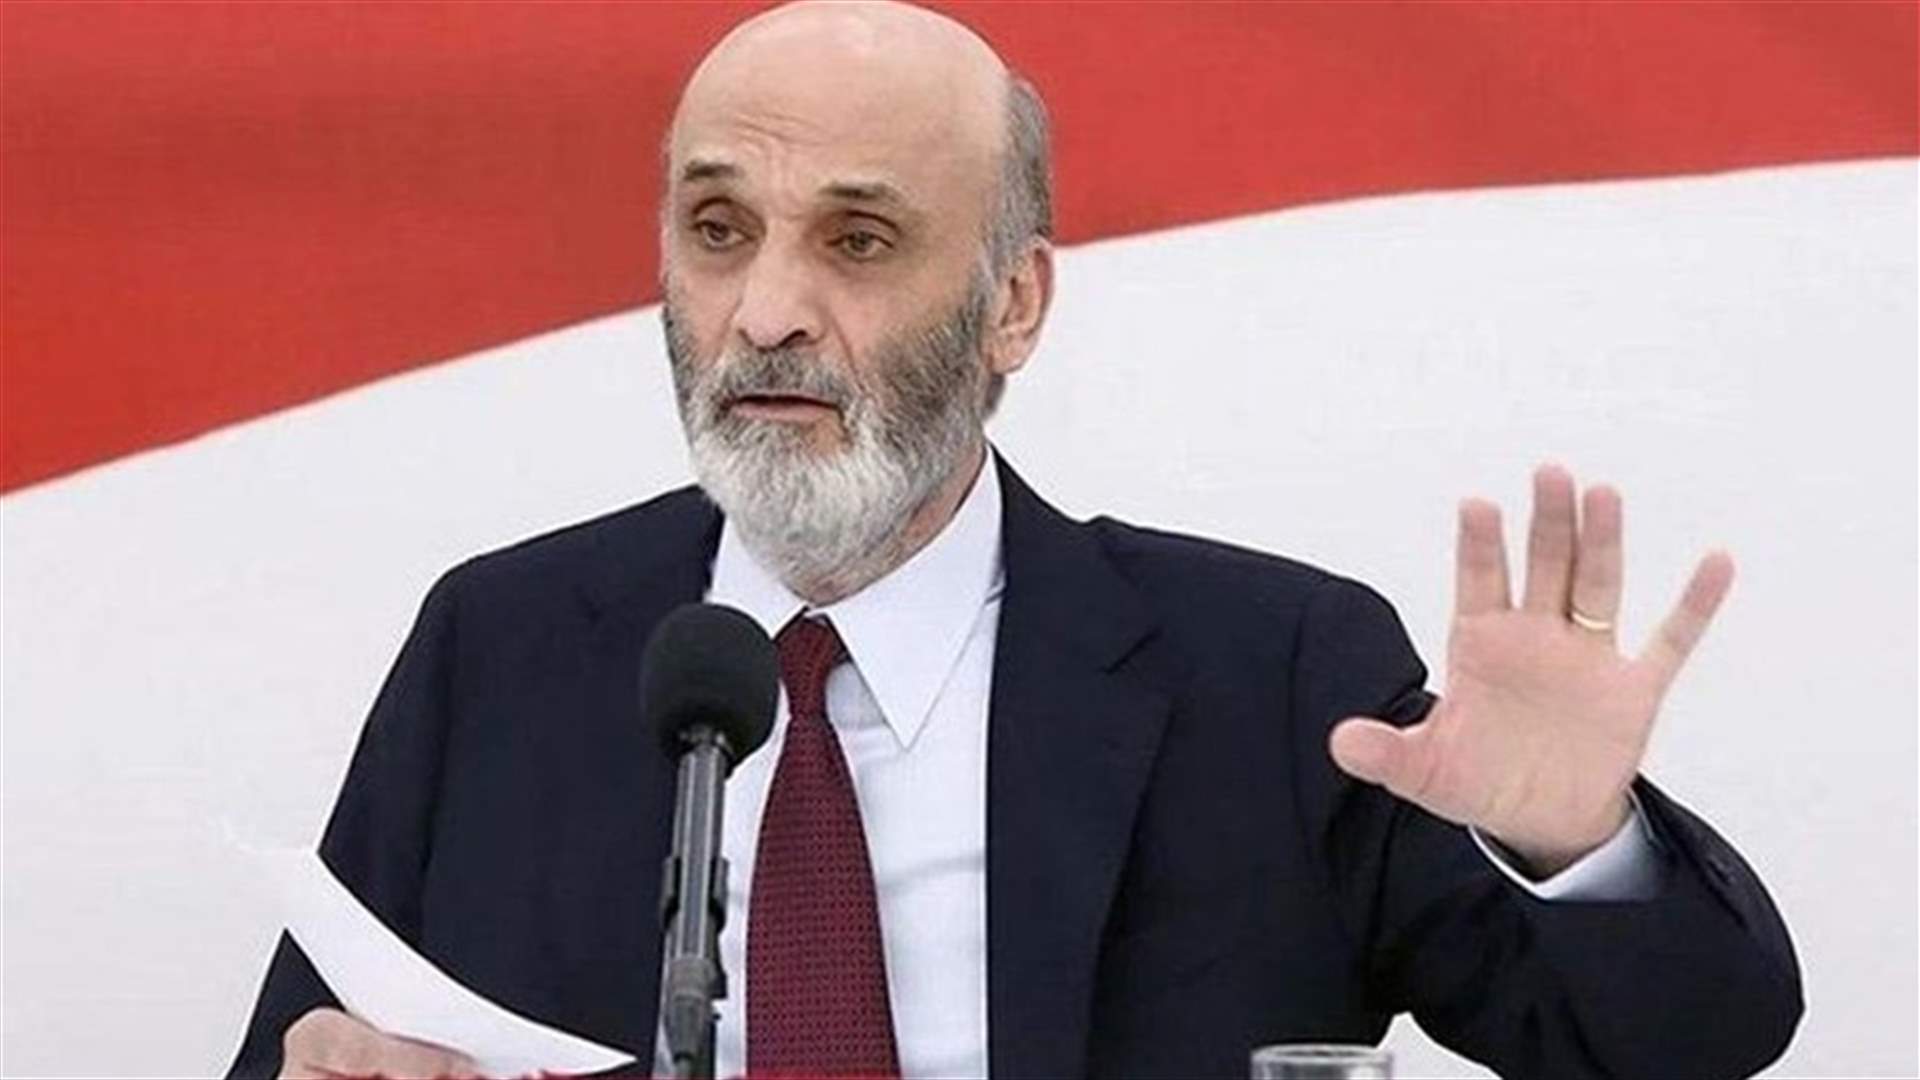 Geagea says Hezbollah demands strike core of French efforts